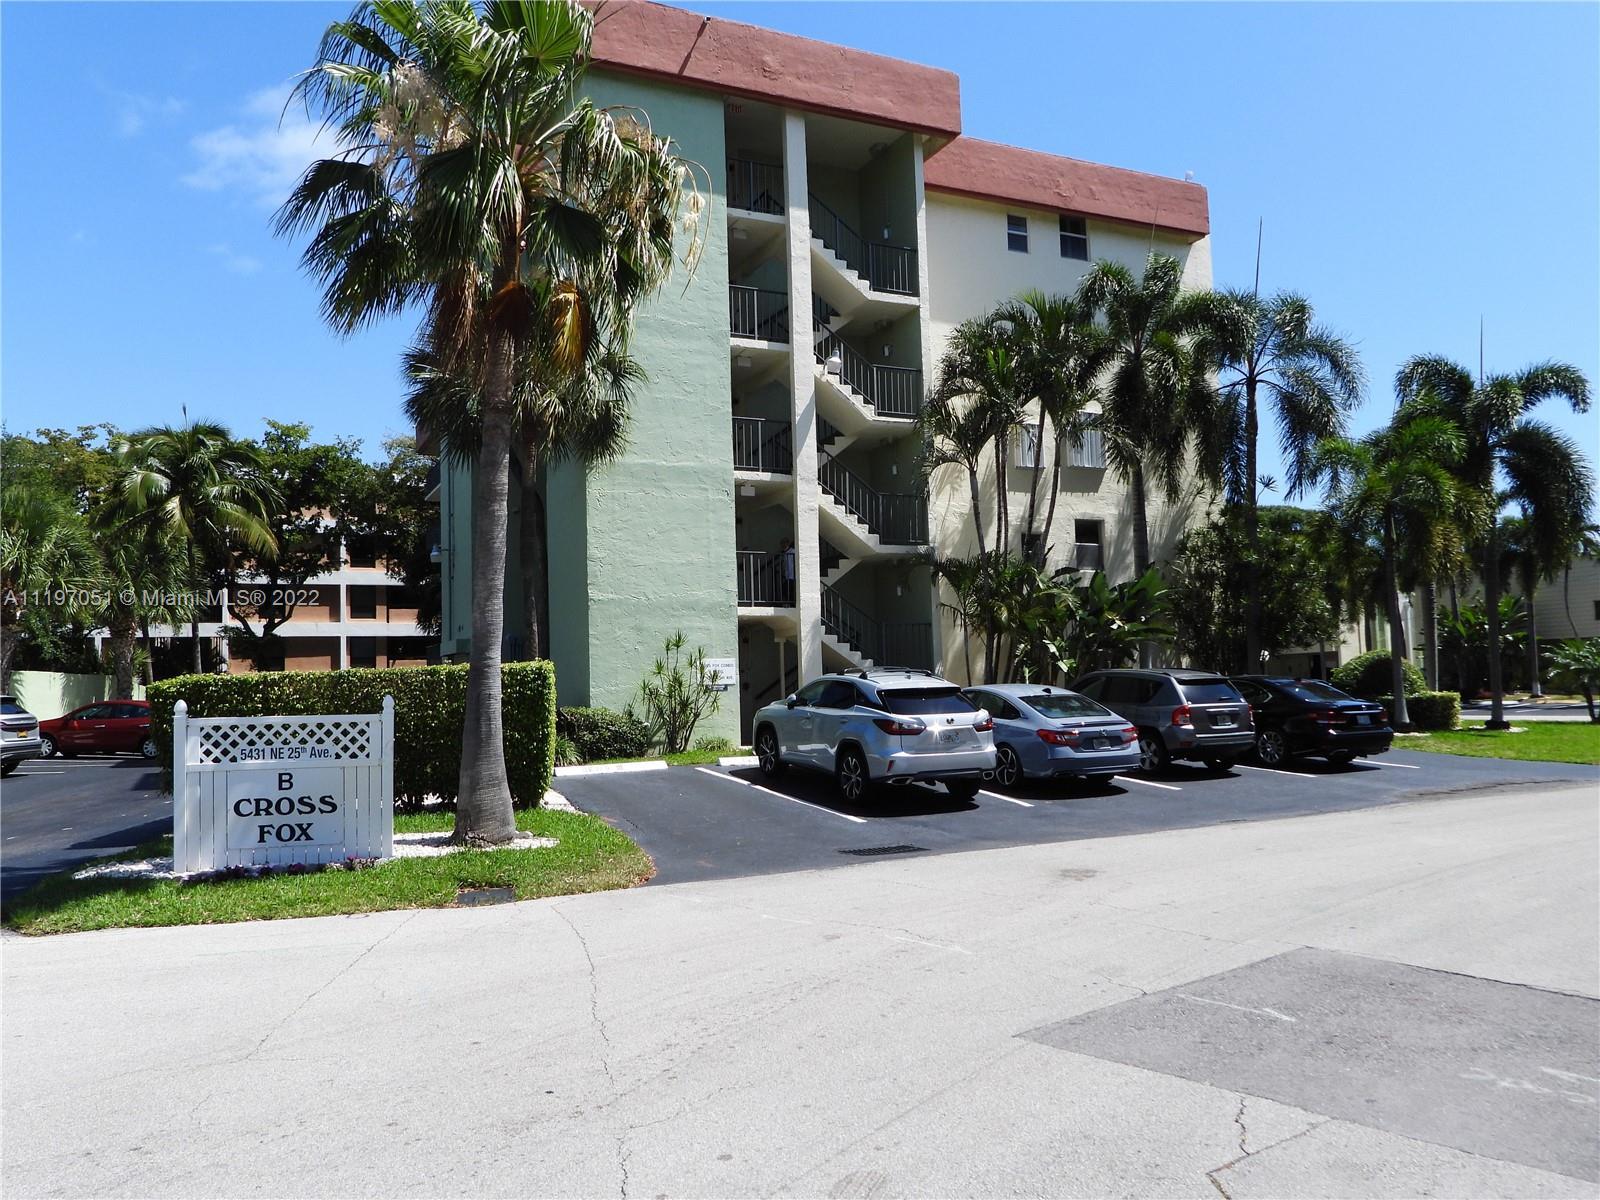 Welcome to Cross Fox! Located in The Landings of Fort Lauderdale - this top floor corner unit is Eas